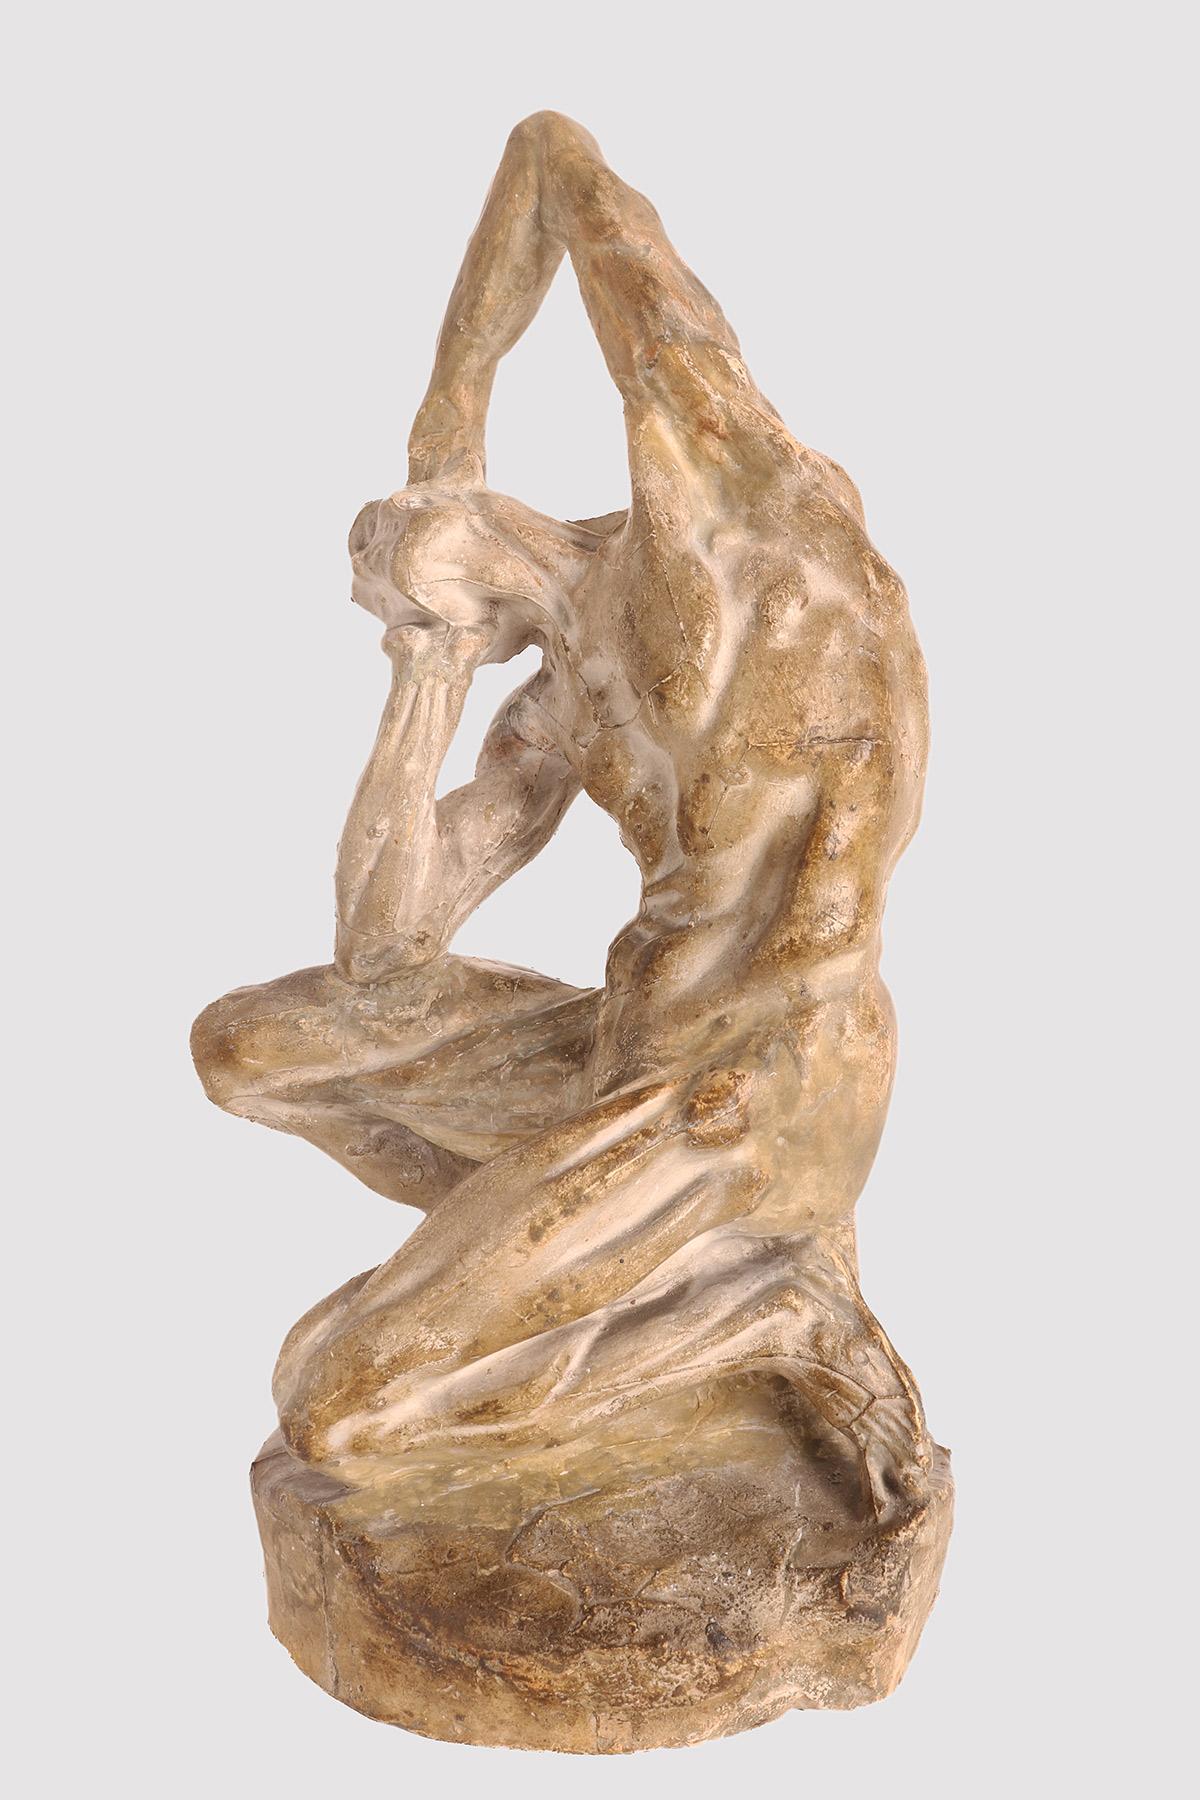 An anatomical plaster sculpture, depicting a flayed man seated on a cubic base, in a position with the torso tilted and the arms holding the head. Reference to a work of the French sculptor Pierre Puget (1620-1694). Anatomical study use. France